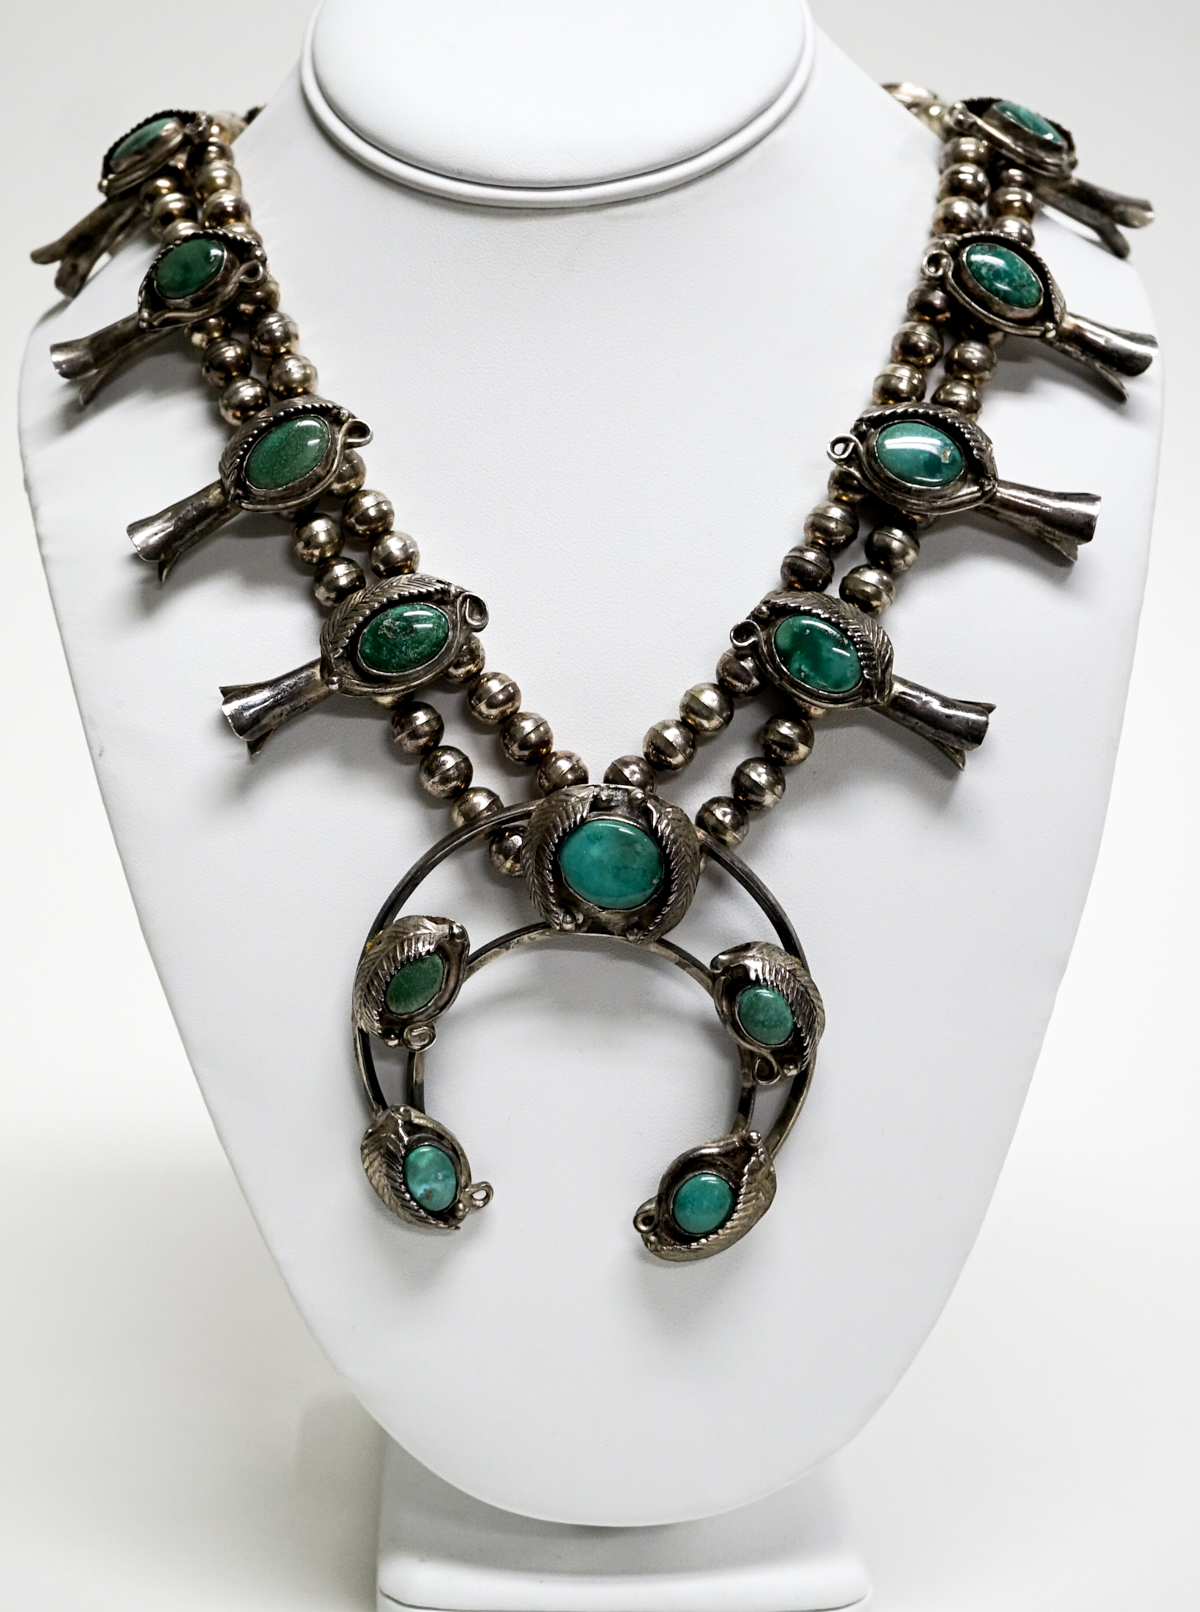 Large Native American Squash Blossom Necklace